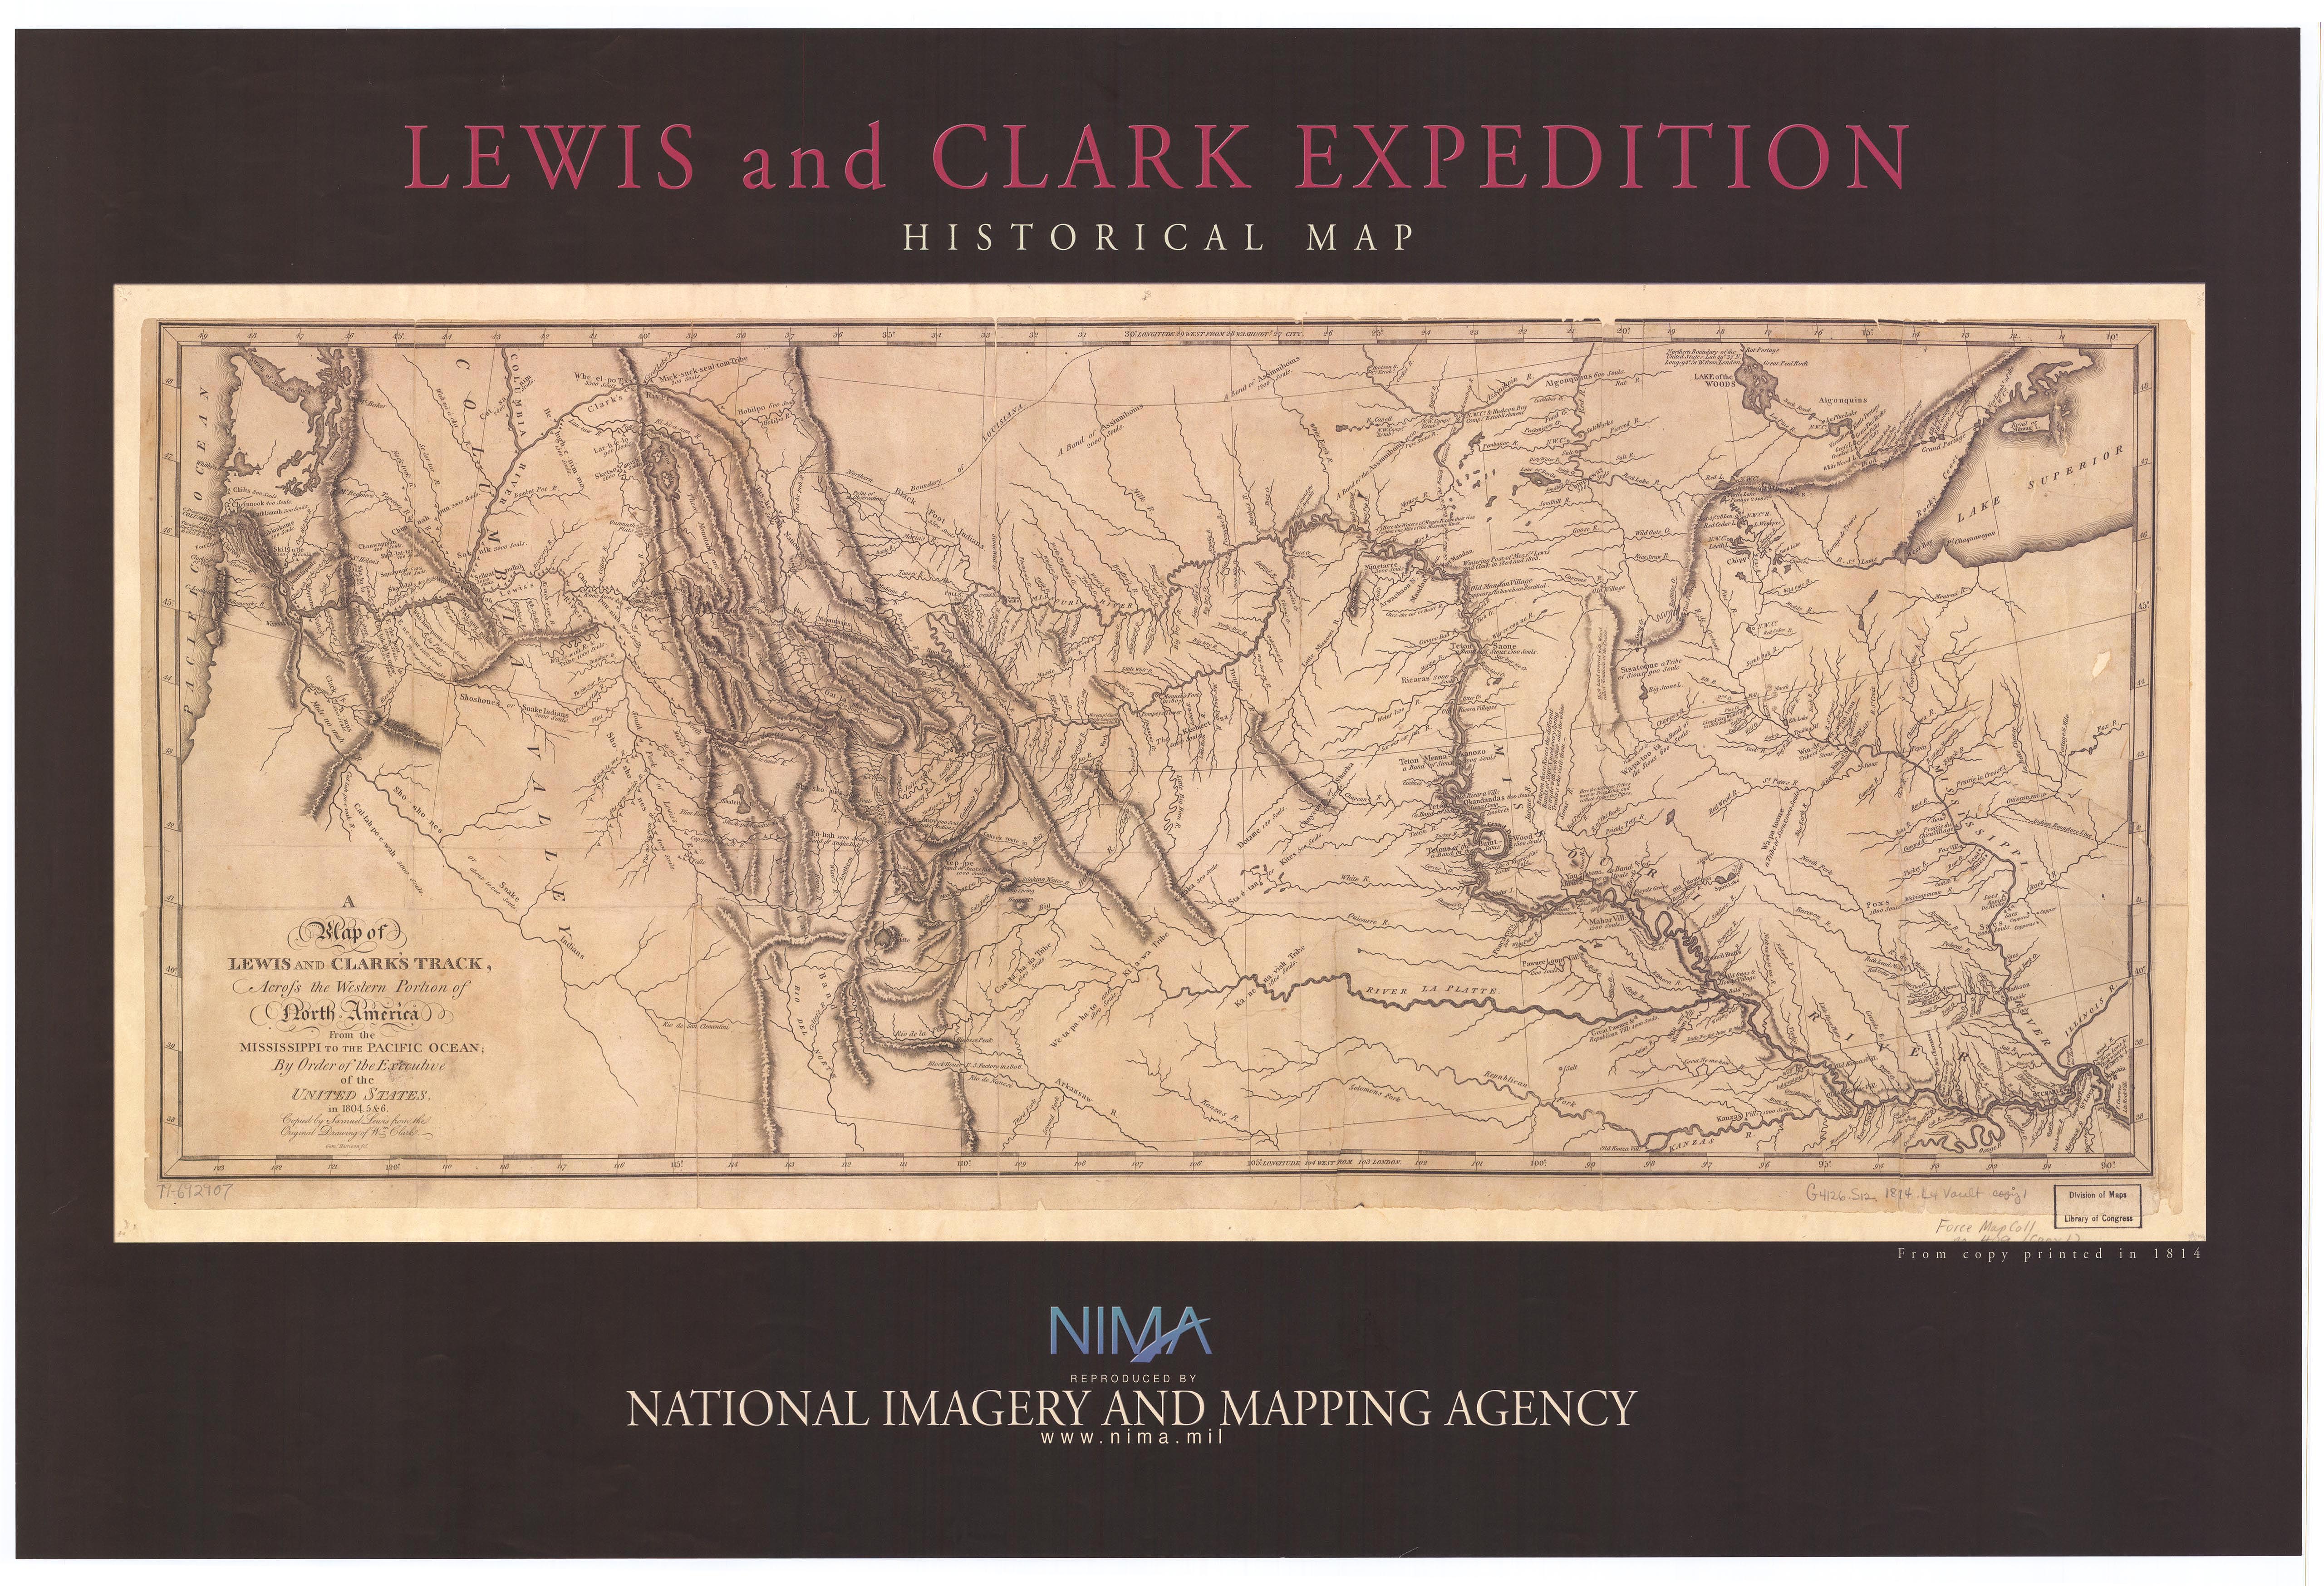 A lewis and clarks expedition journal entry